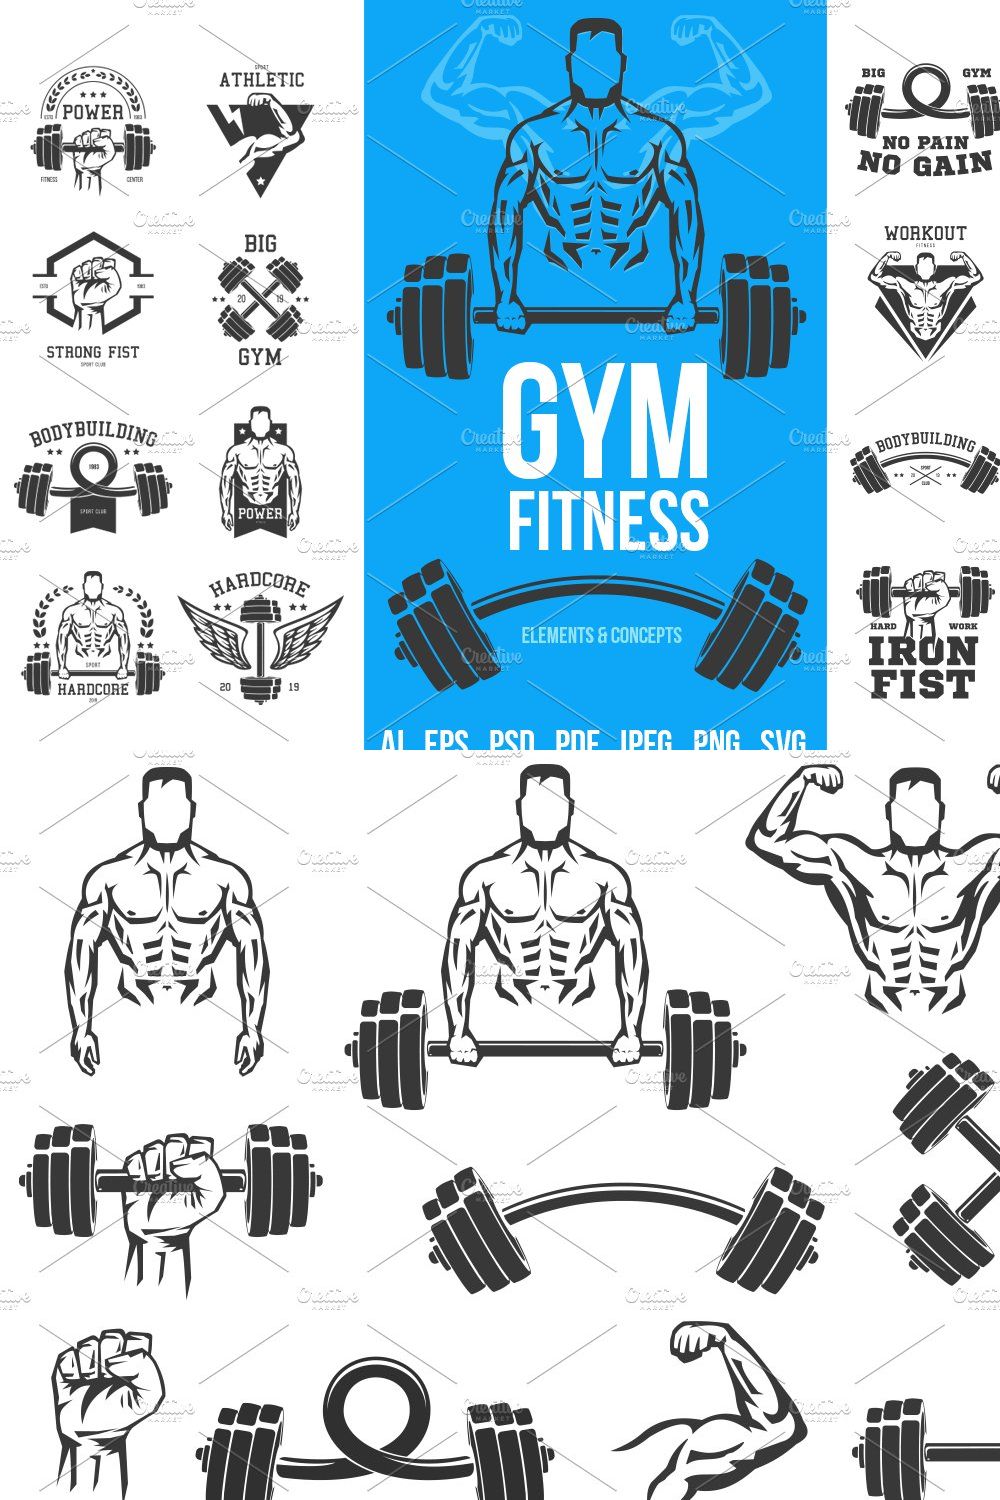 Gym fitness pinterest preview image.